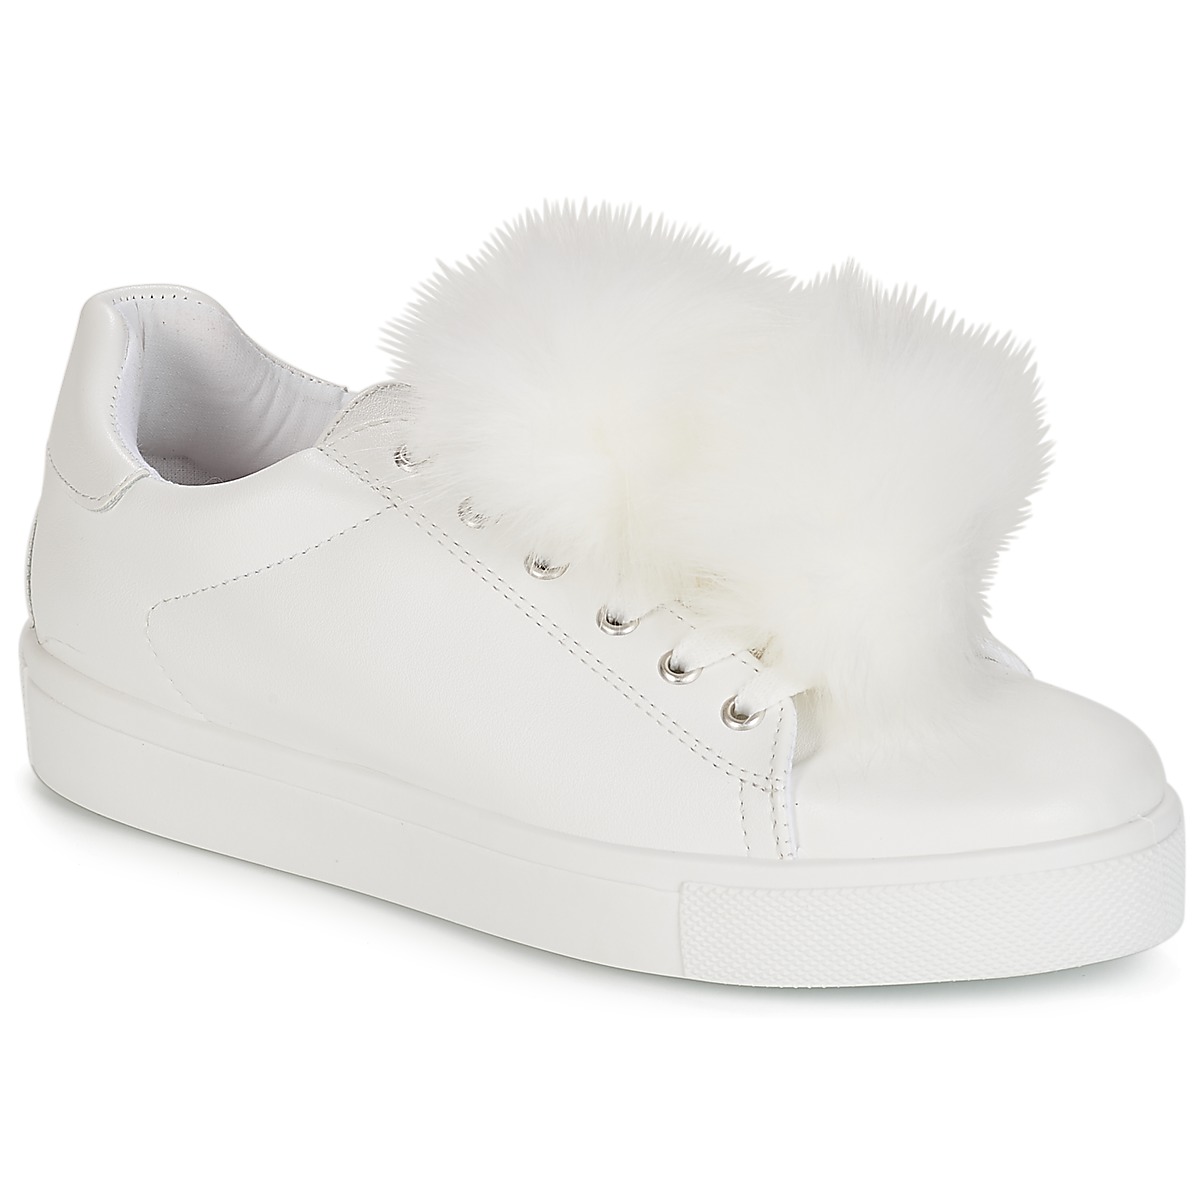 Chaussures Femme The home deco fa POMPON Blanc